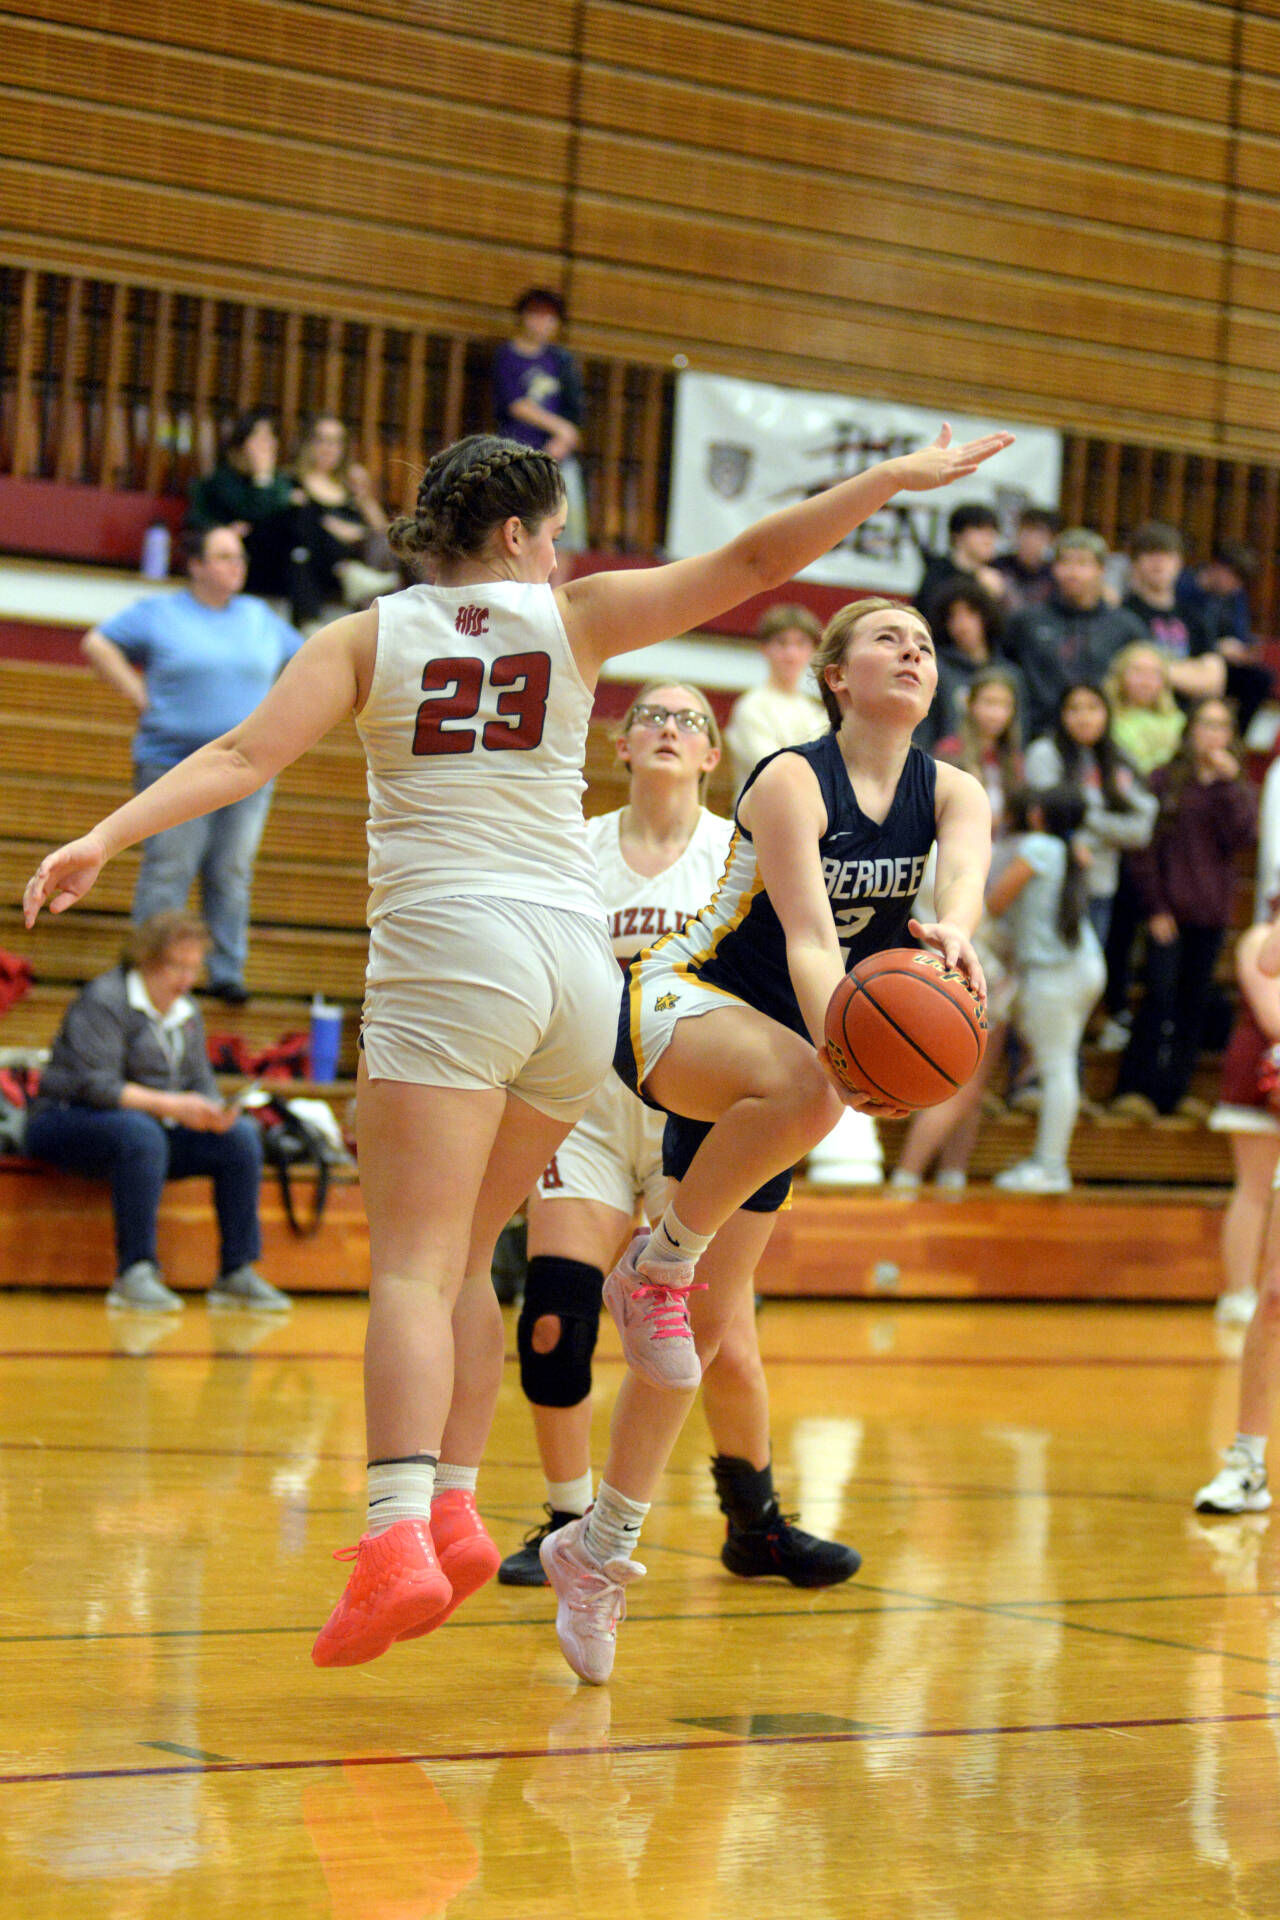 RYAN SPARKS | THE DAILY WORLD Aberdeen senior guard Annie Troeh (2) performs a Euro-step layup against Hoquiam’s Avery Howard in the first quarter of the Bobcats’ 53-32 victory on Friday in Hoquiam.